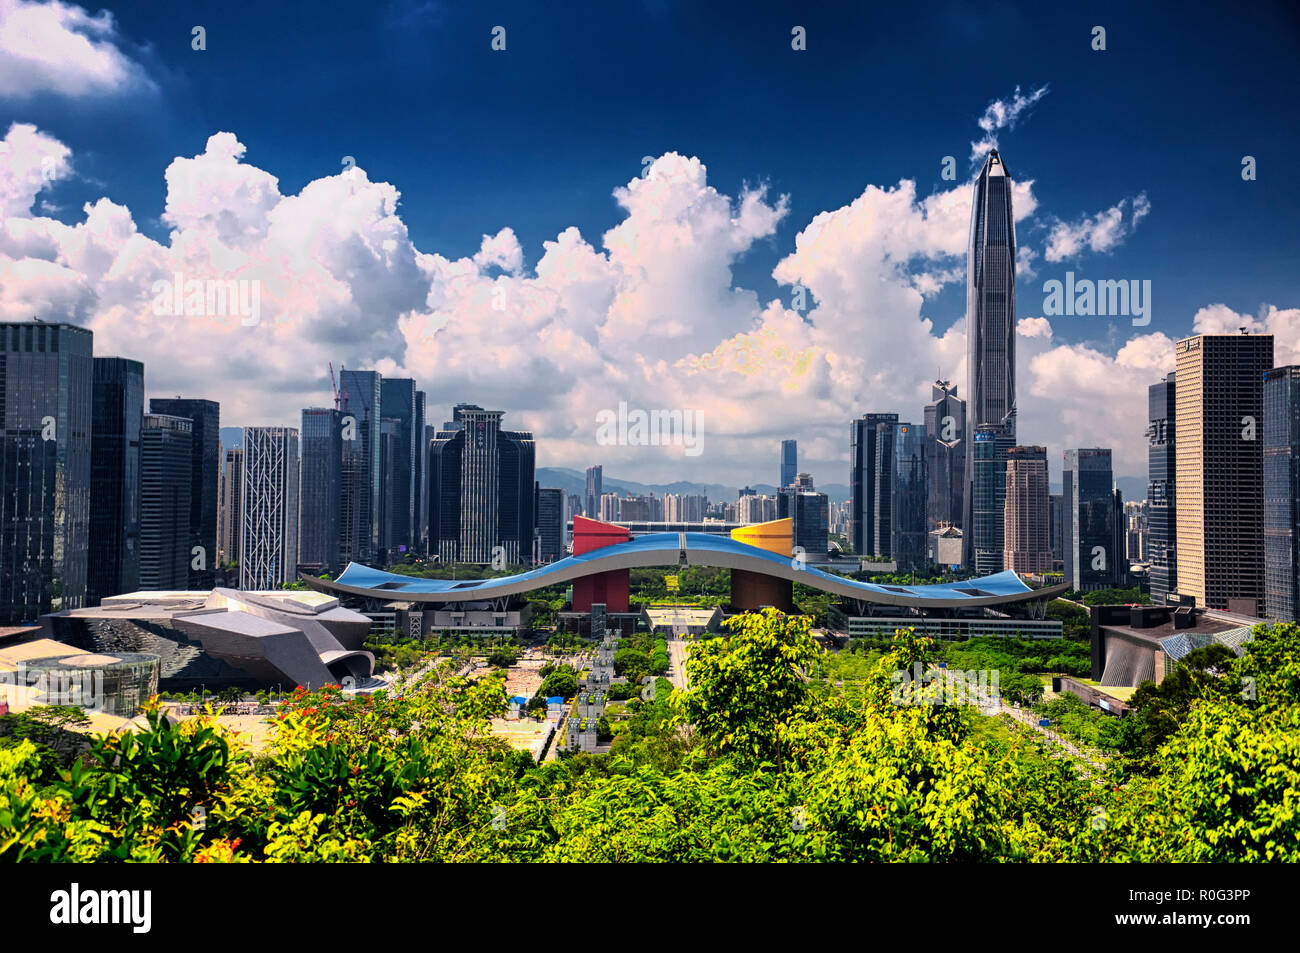 Shenzhen, China. May 26, 2018.  the shenzhen city skyline and civic center as seen from Lianhuashan Park in the city center on a sunny day. Stock Photo